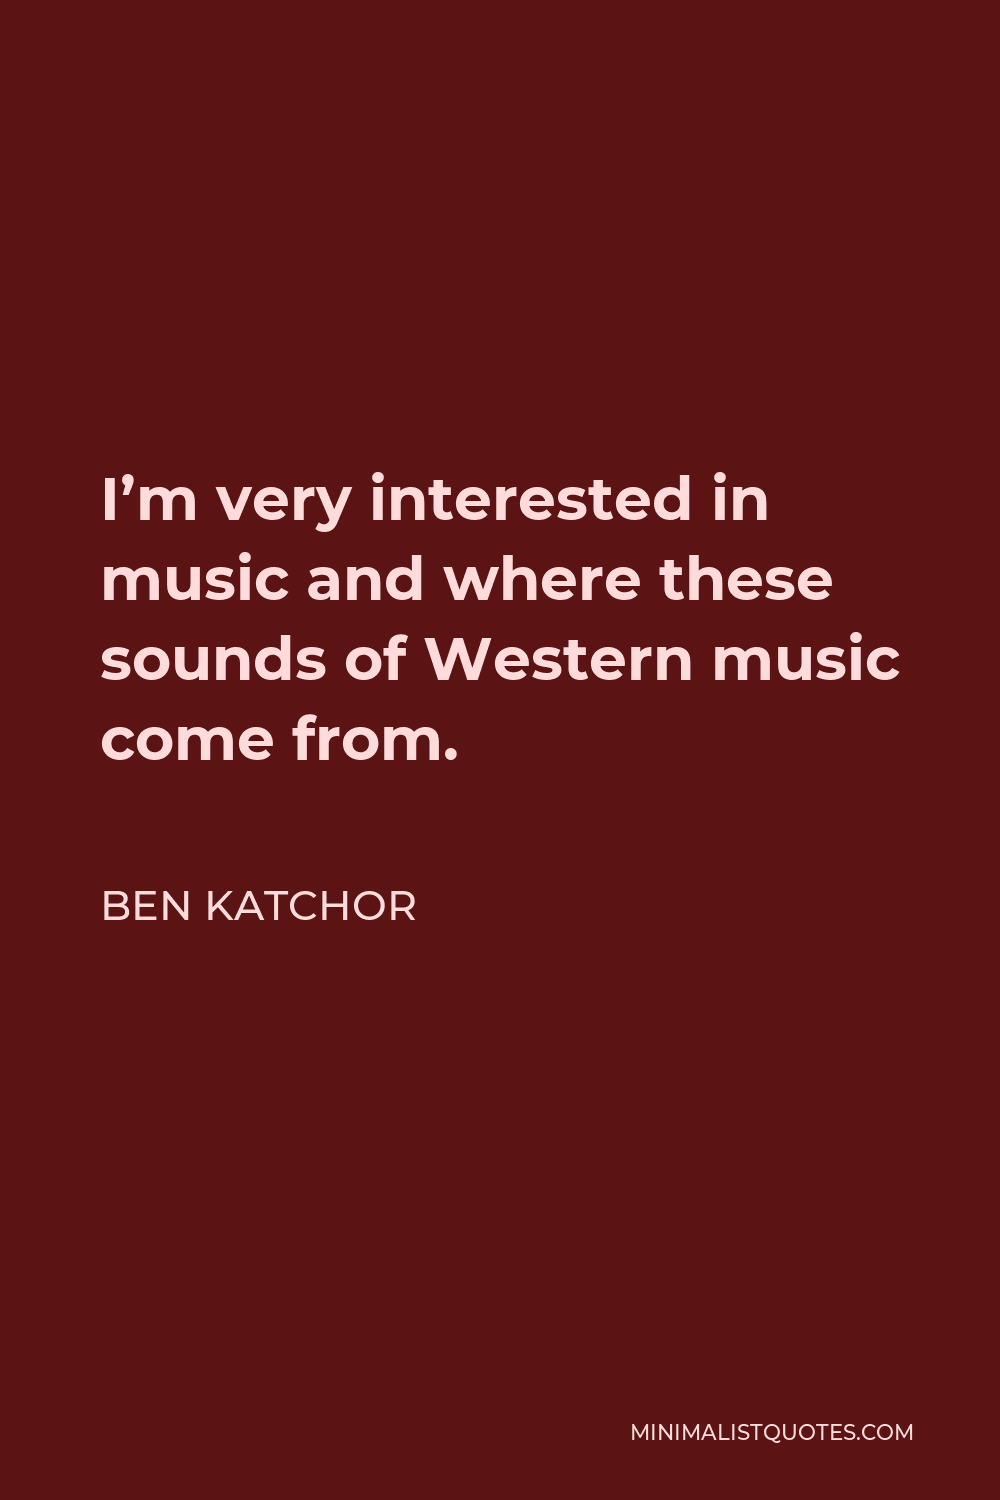 Ben Katchor Quote - I’m very interested in music and where these sounds of Western music come from.